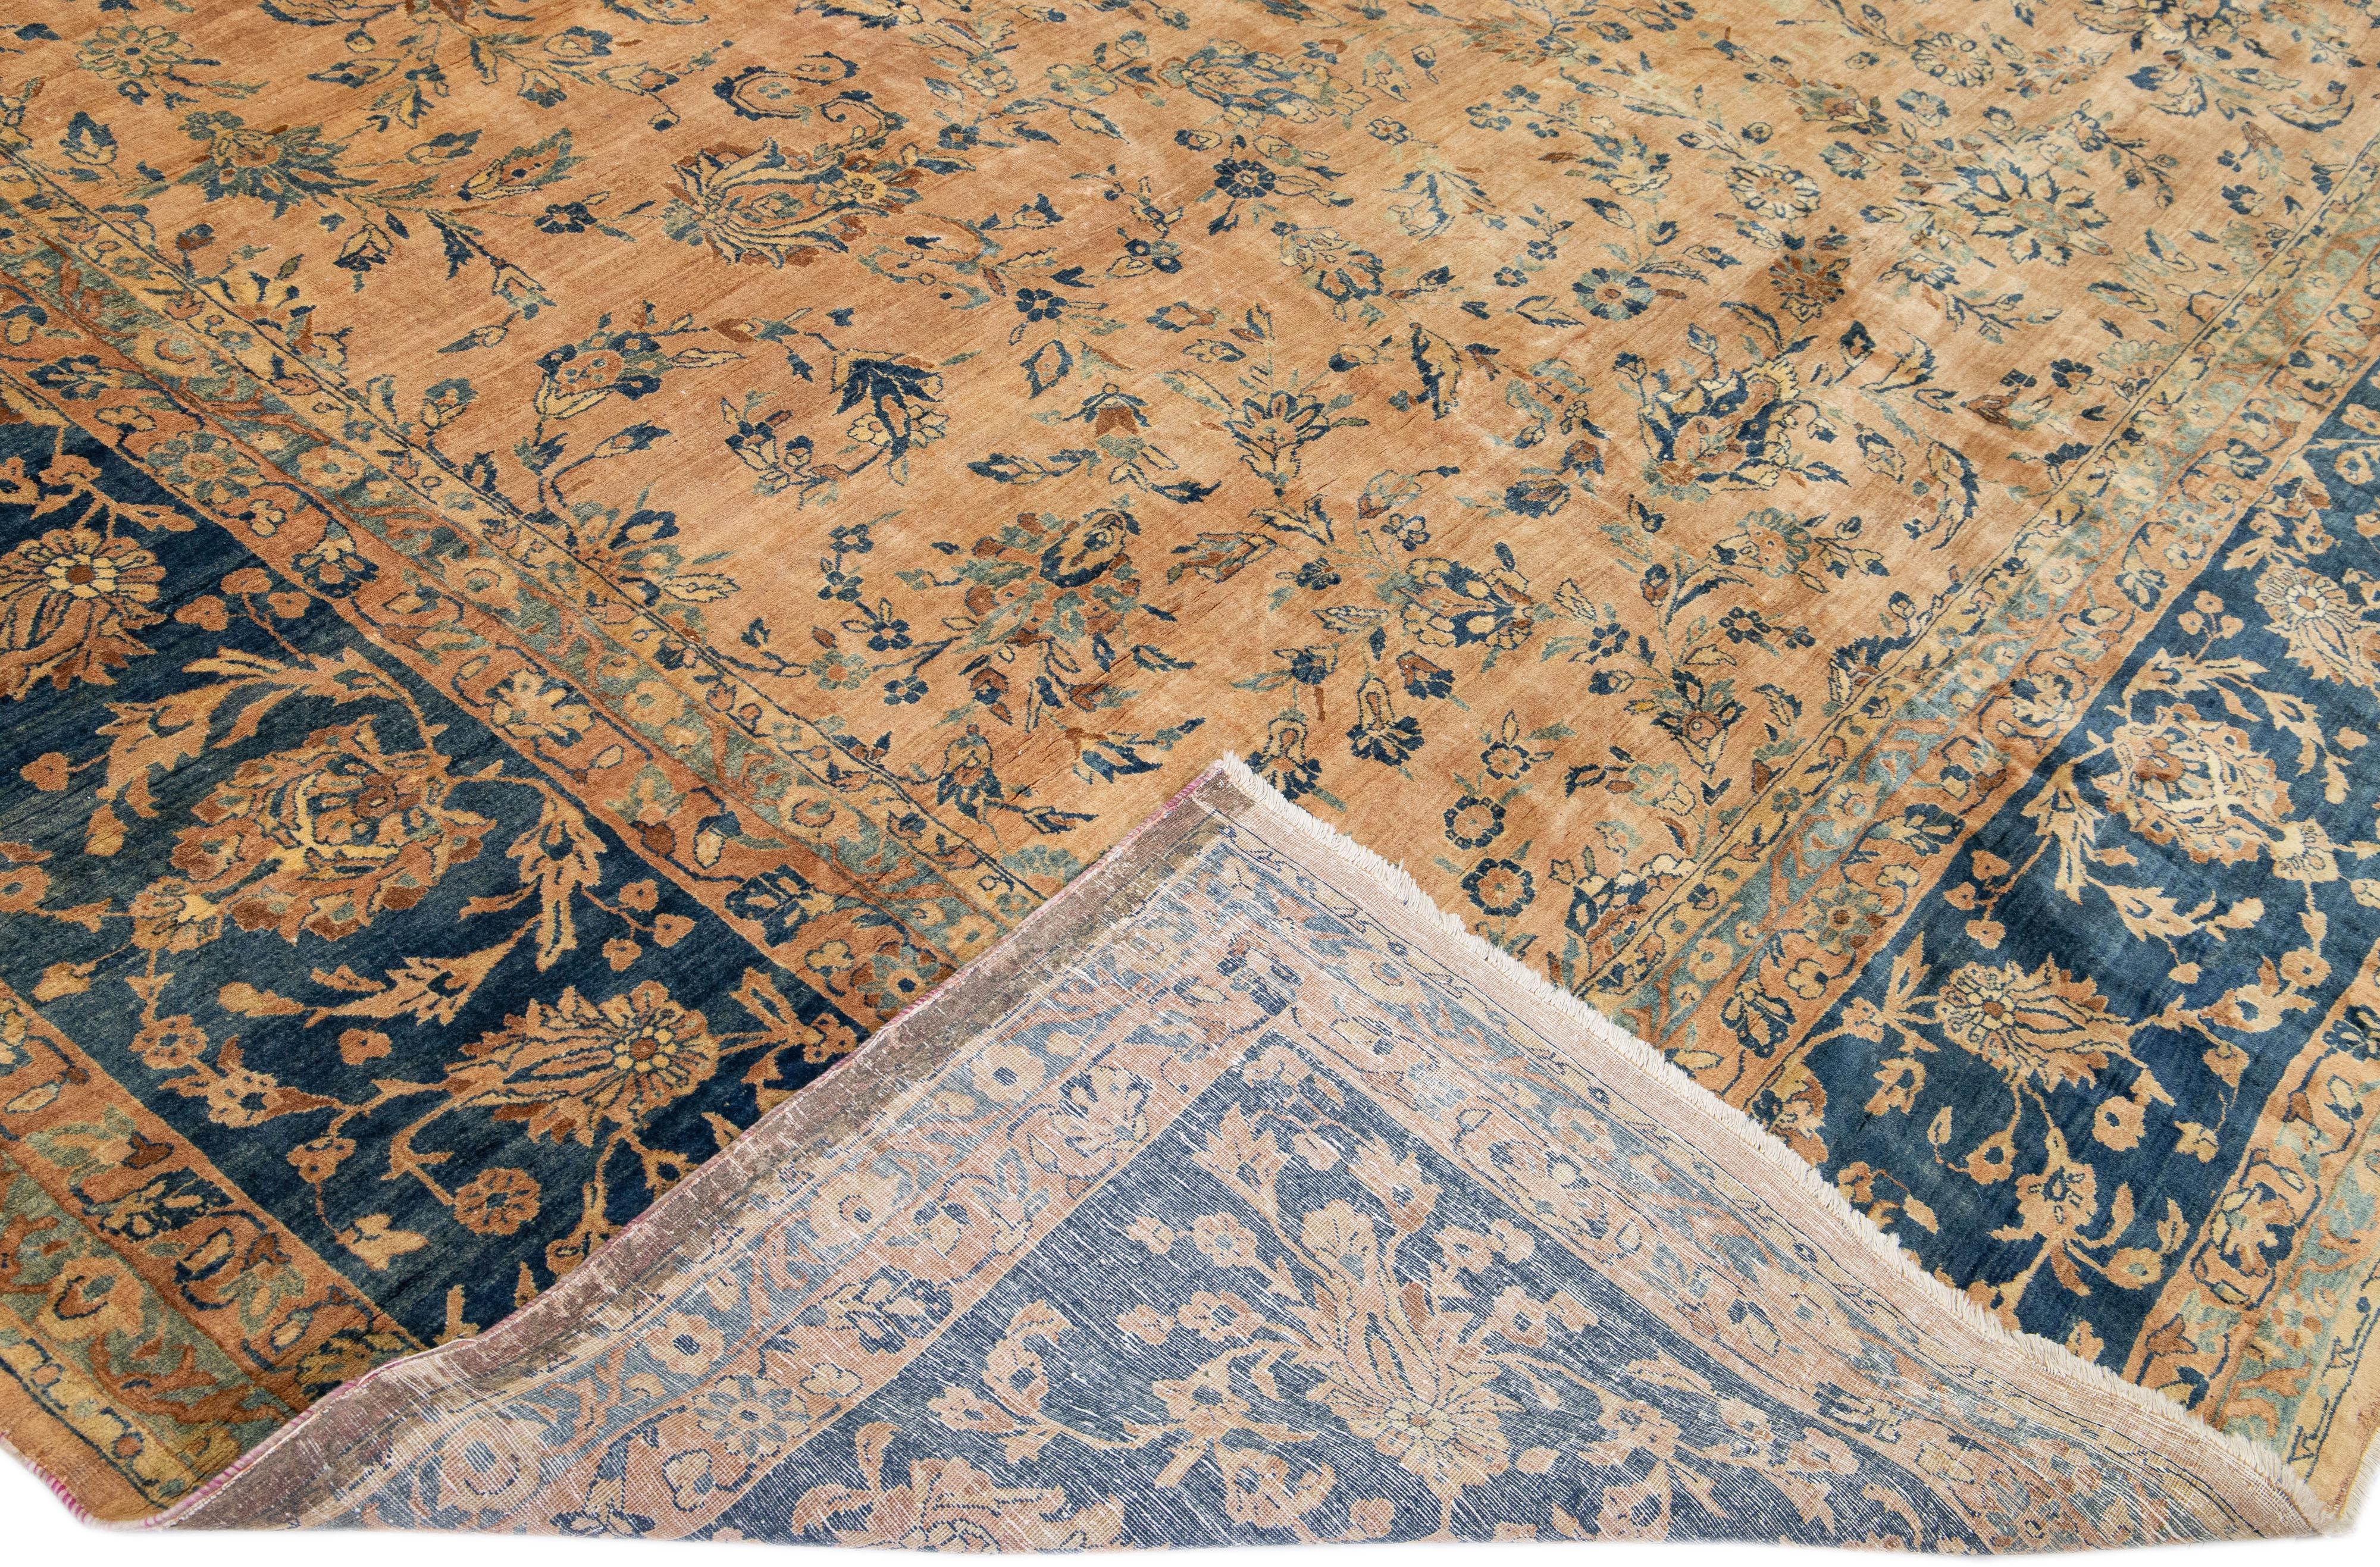 Beautiful antique Tabriz hand-knotted wool rug with a tan field. This Persian rug has a navy blue-designed frame with brown accents on a Classic floral design.

This rug measure: 15'2